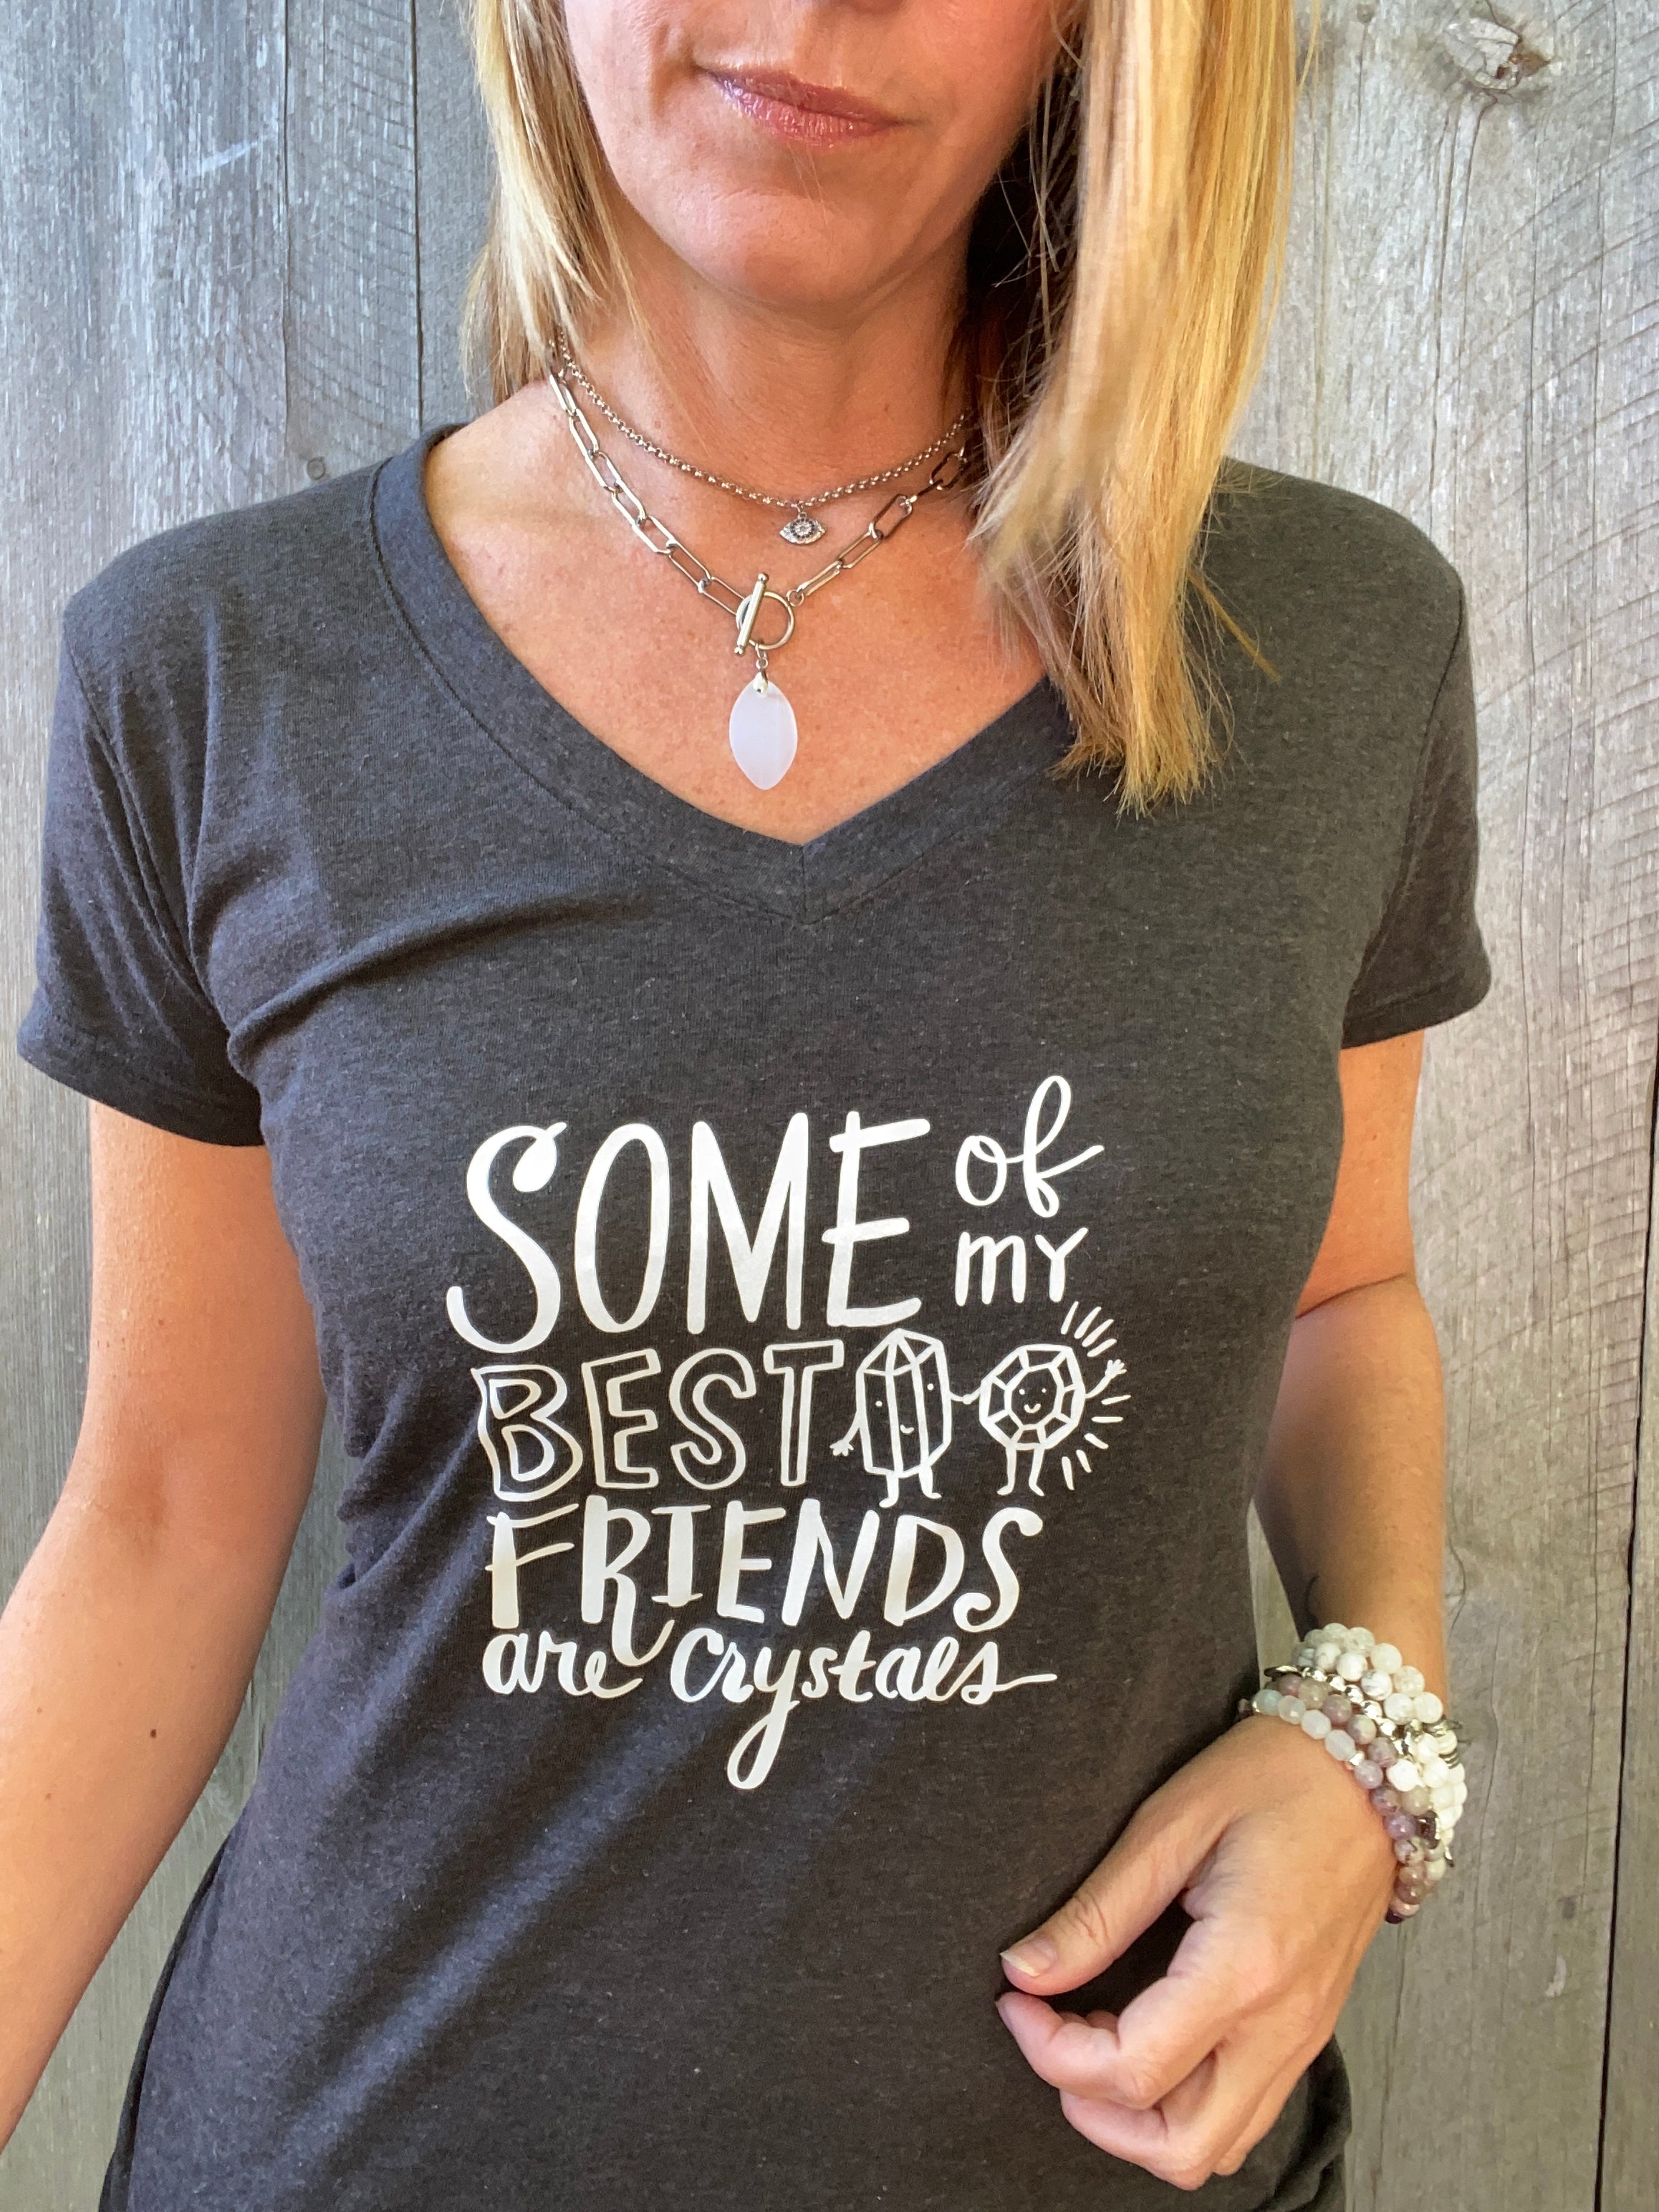 Some of my Best Friends are Crystals T-Shirt